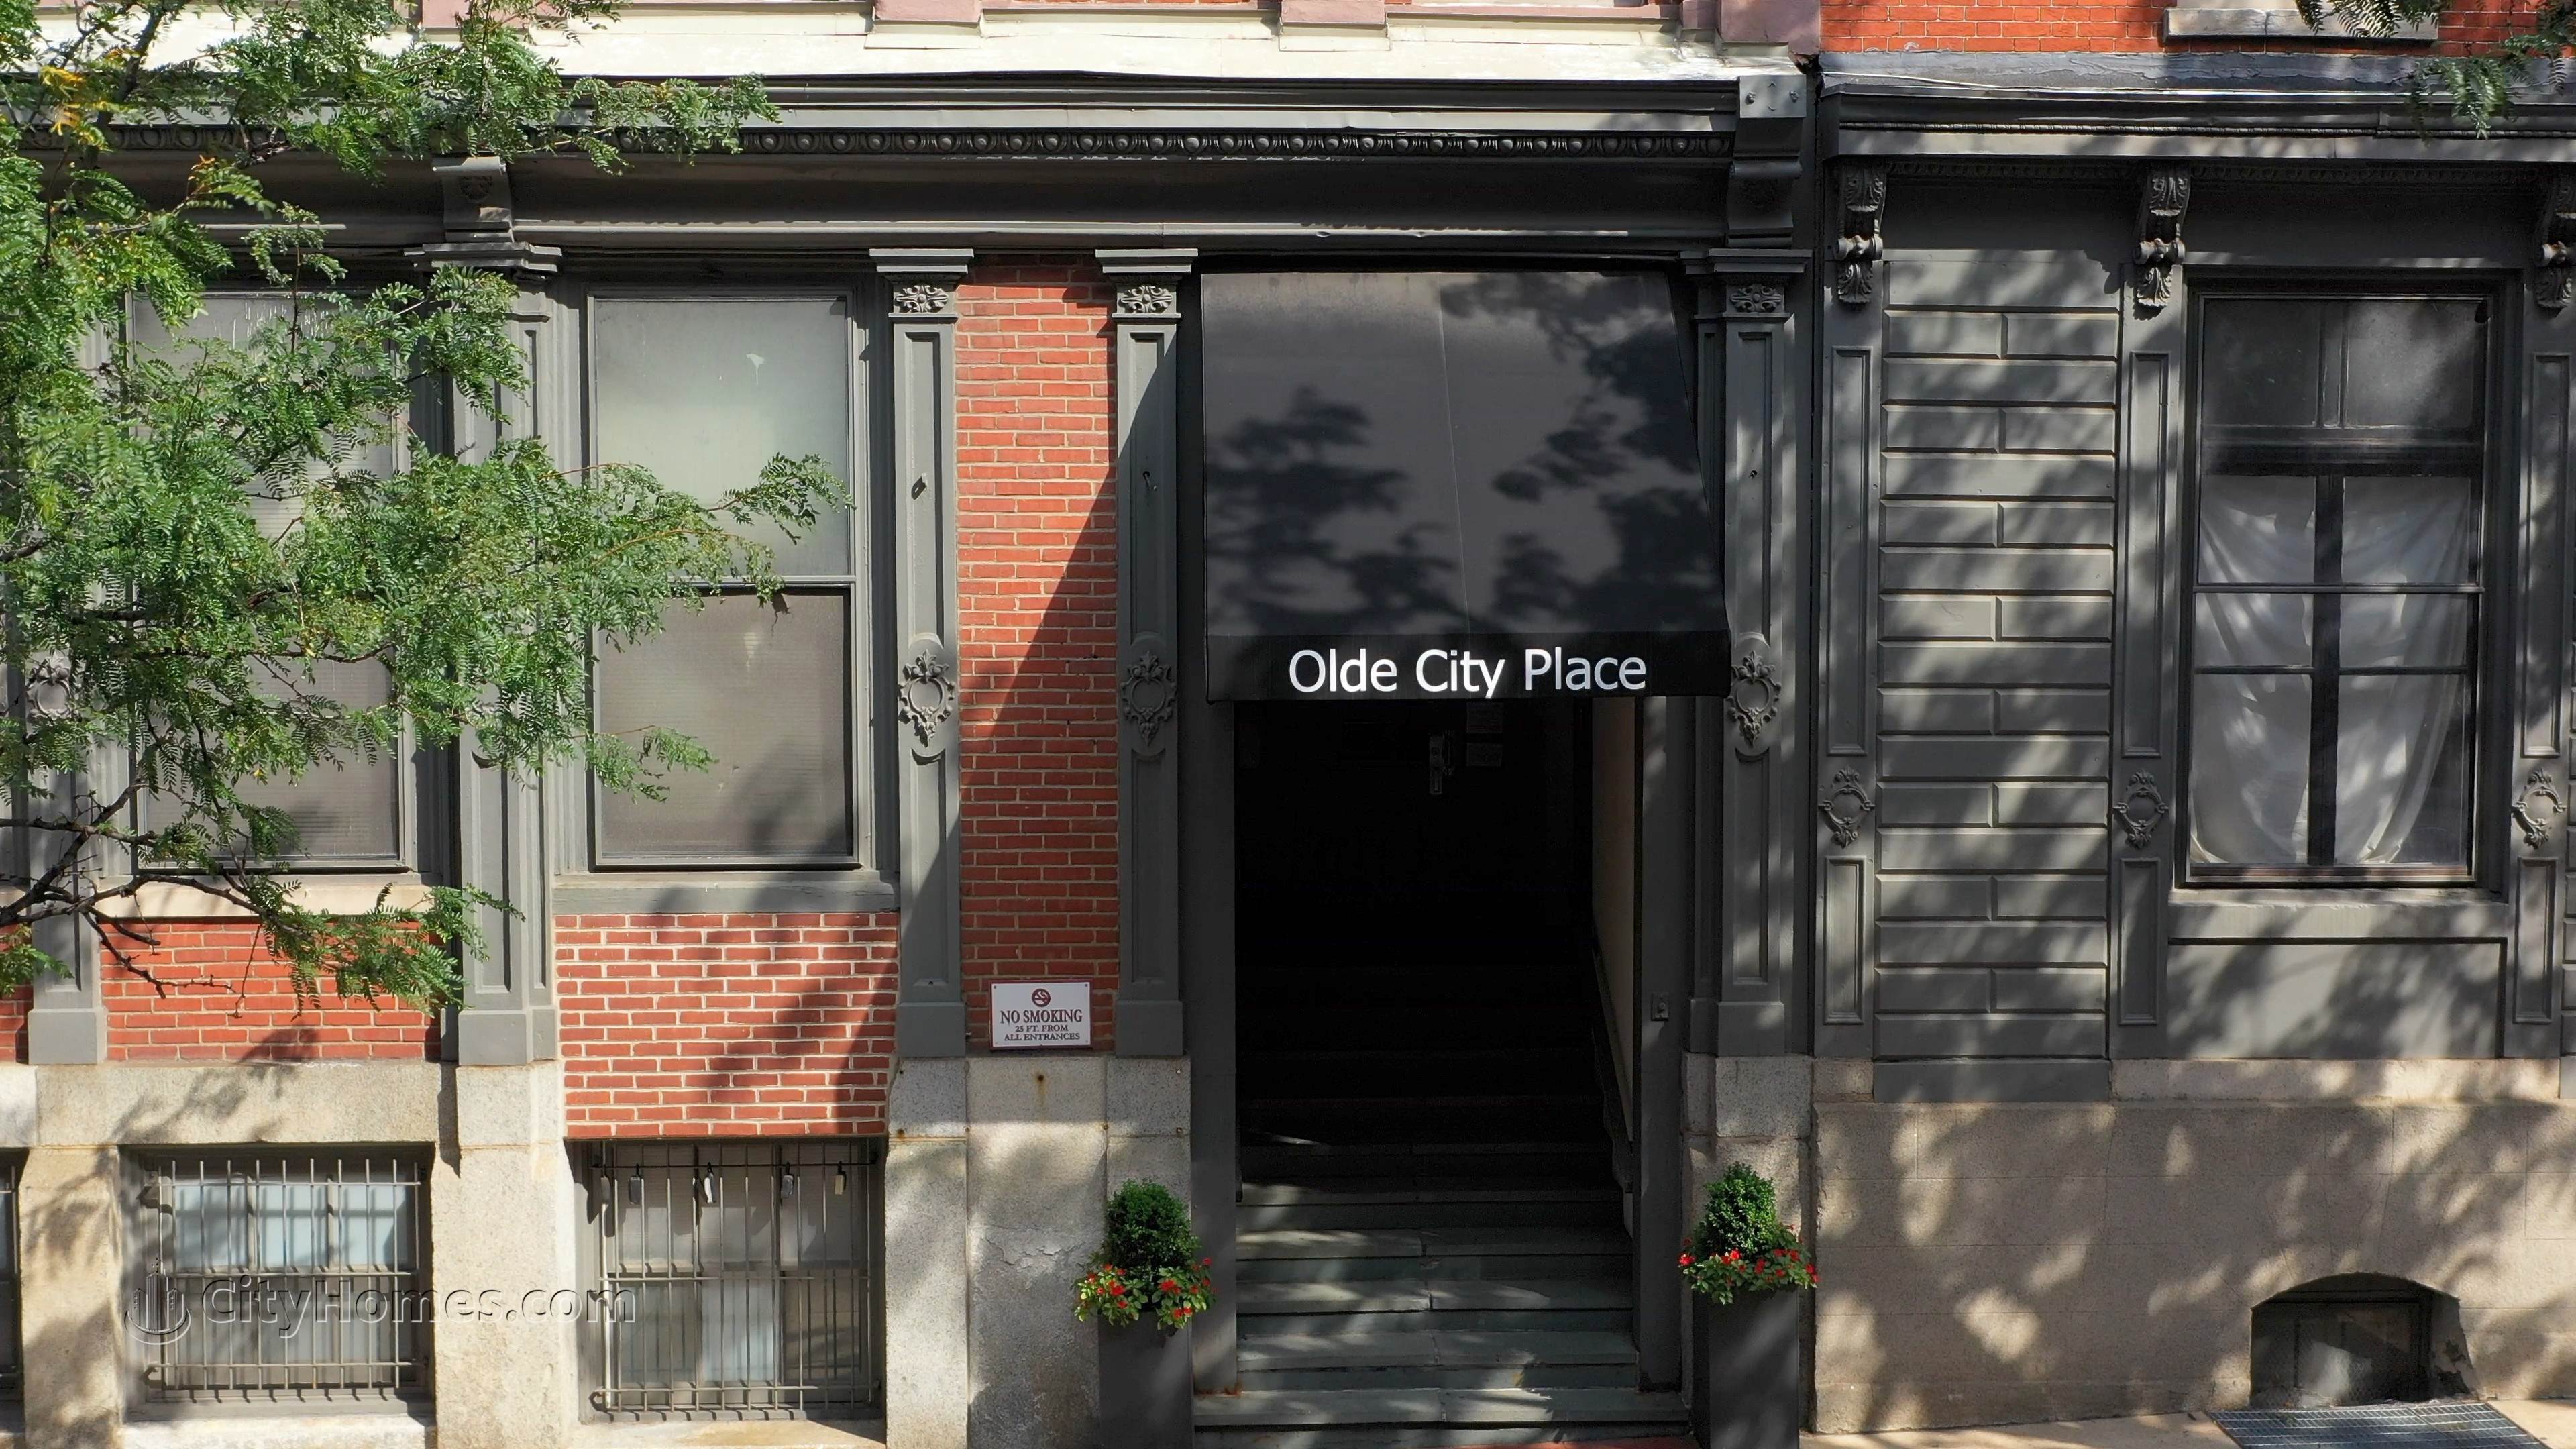 Olde City Place building at 205-11 N 4th St, Old City, Philadelphia, PA 19106